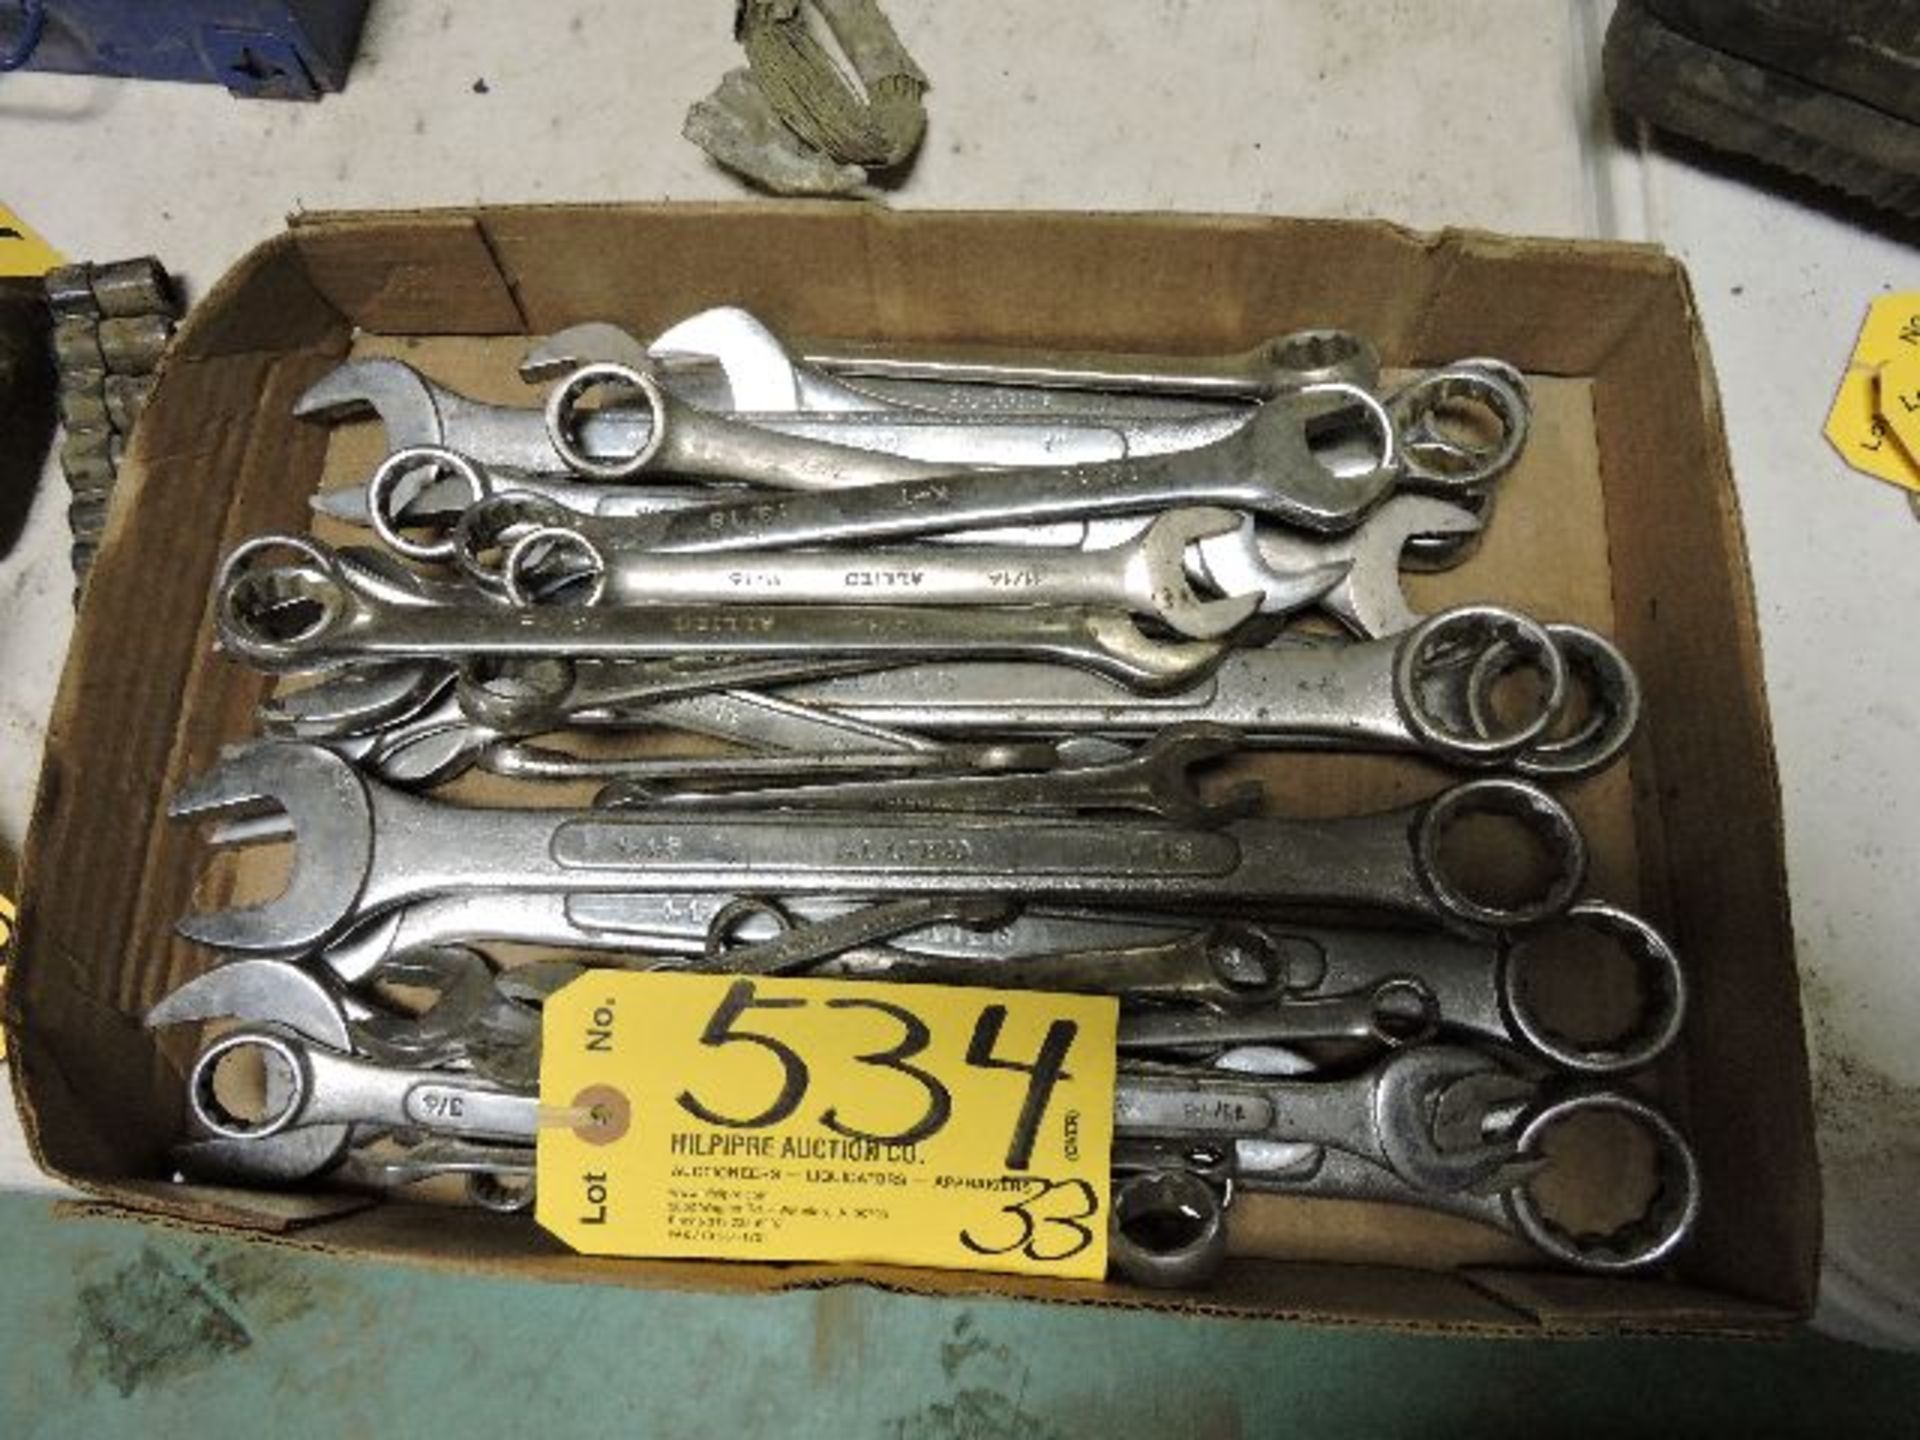 Misc. wrenches, up to 1 1/4".